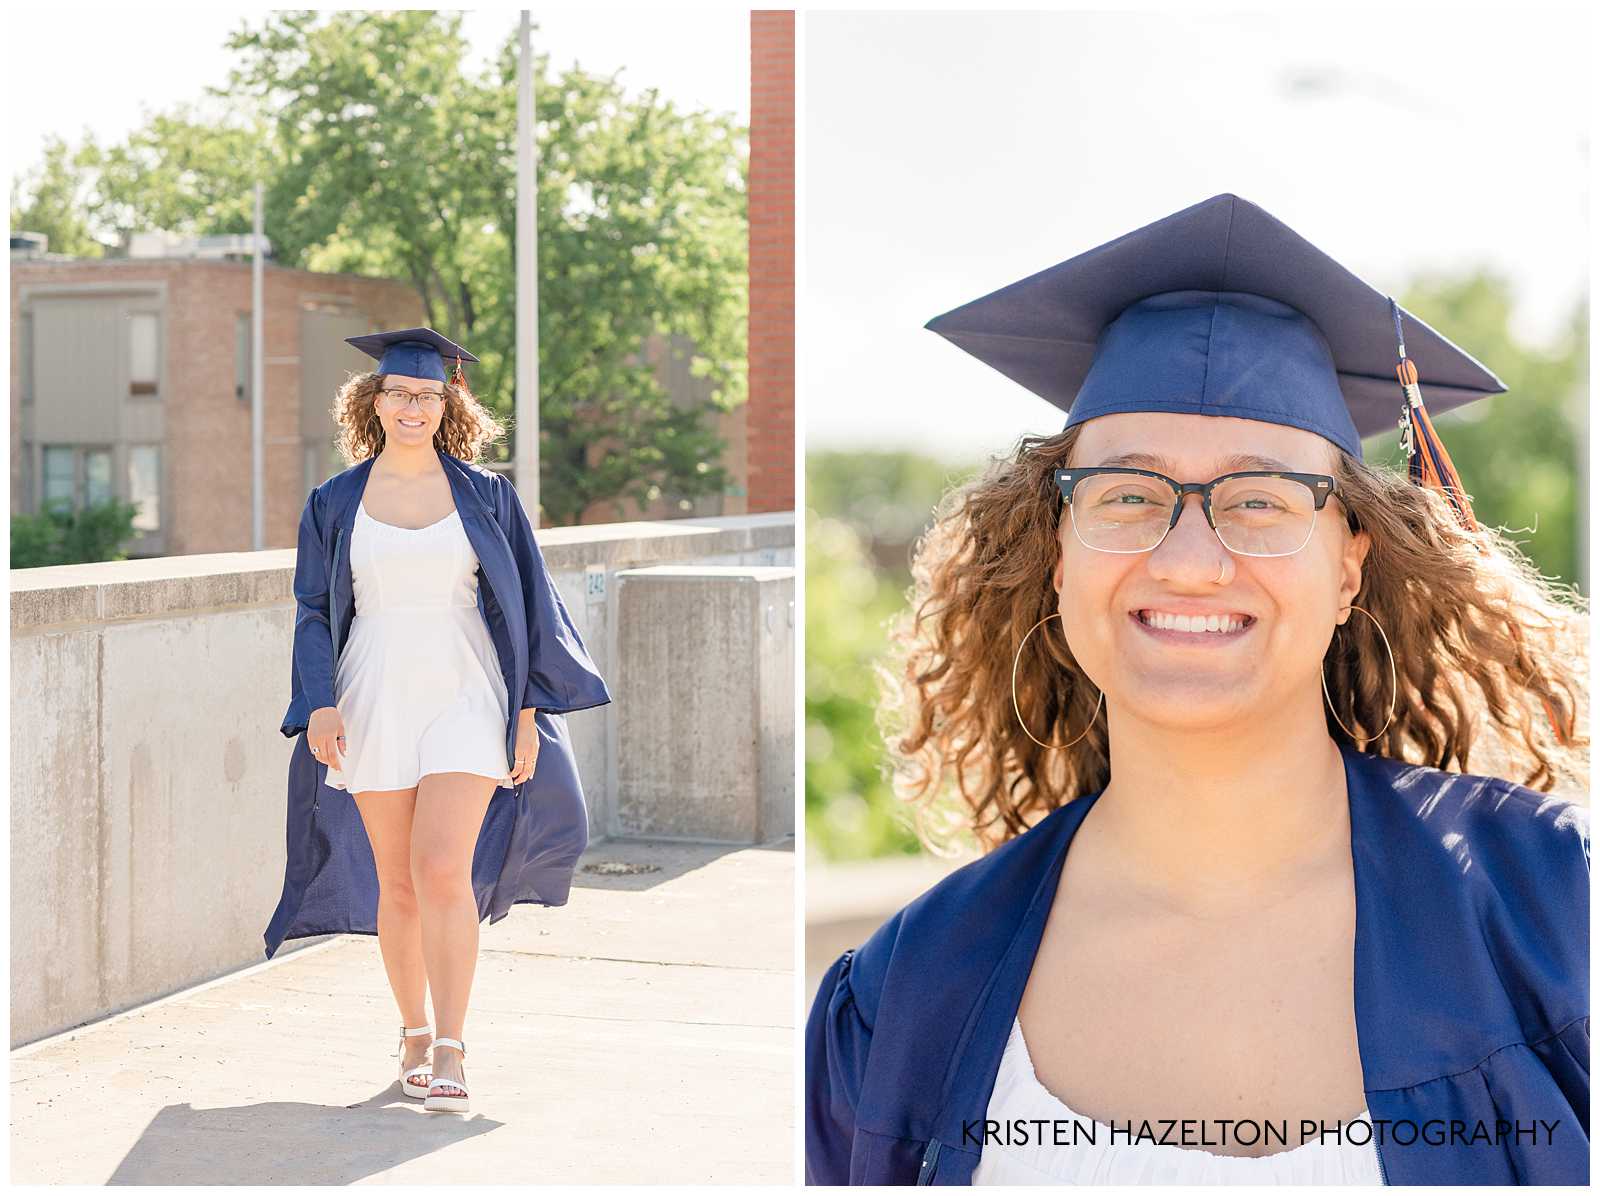 High school senior girl walking while wearing her cap and gown